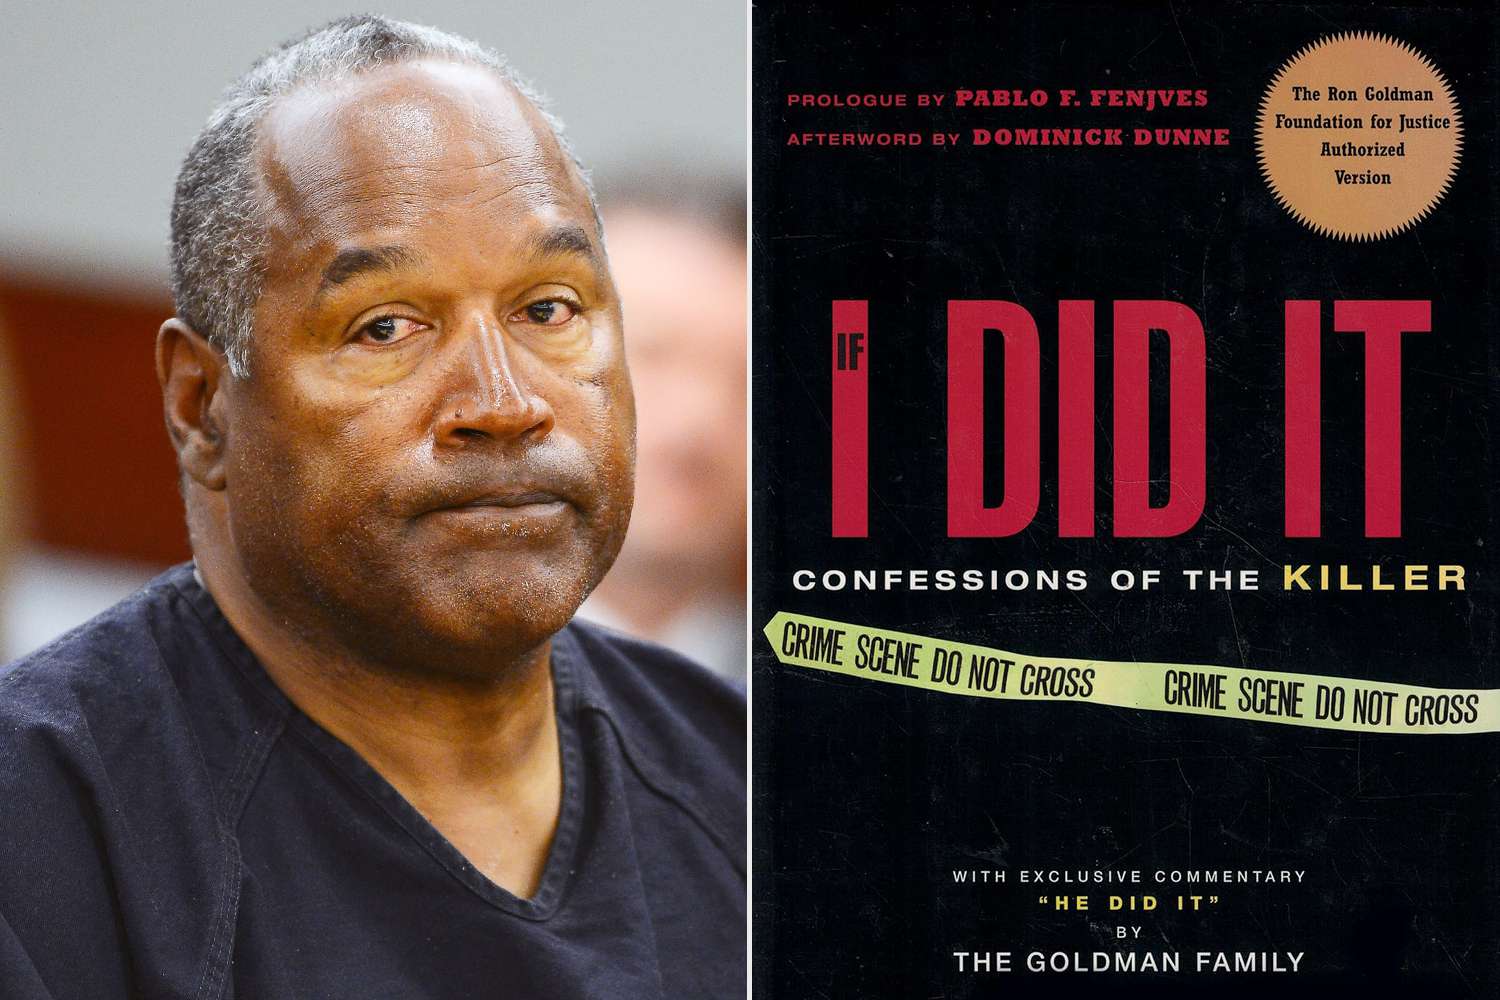 The Story of O.J. Simpsons Book, ‘If I Did It,’ And Why It Was Canceled and Later Released [Video]